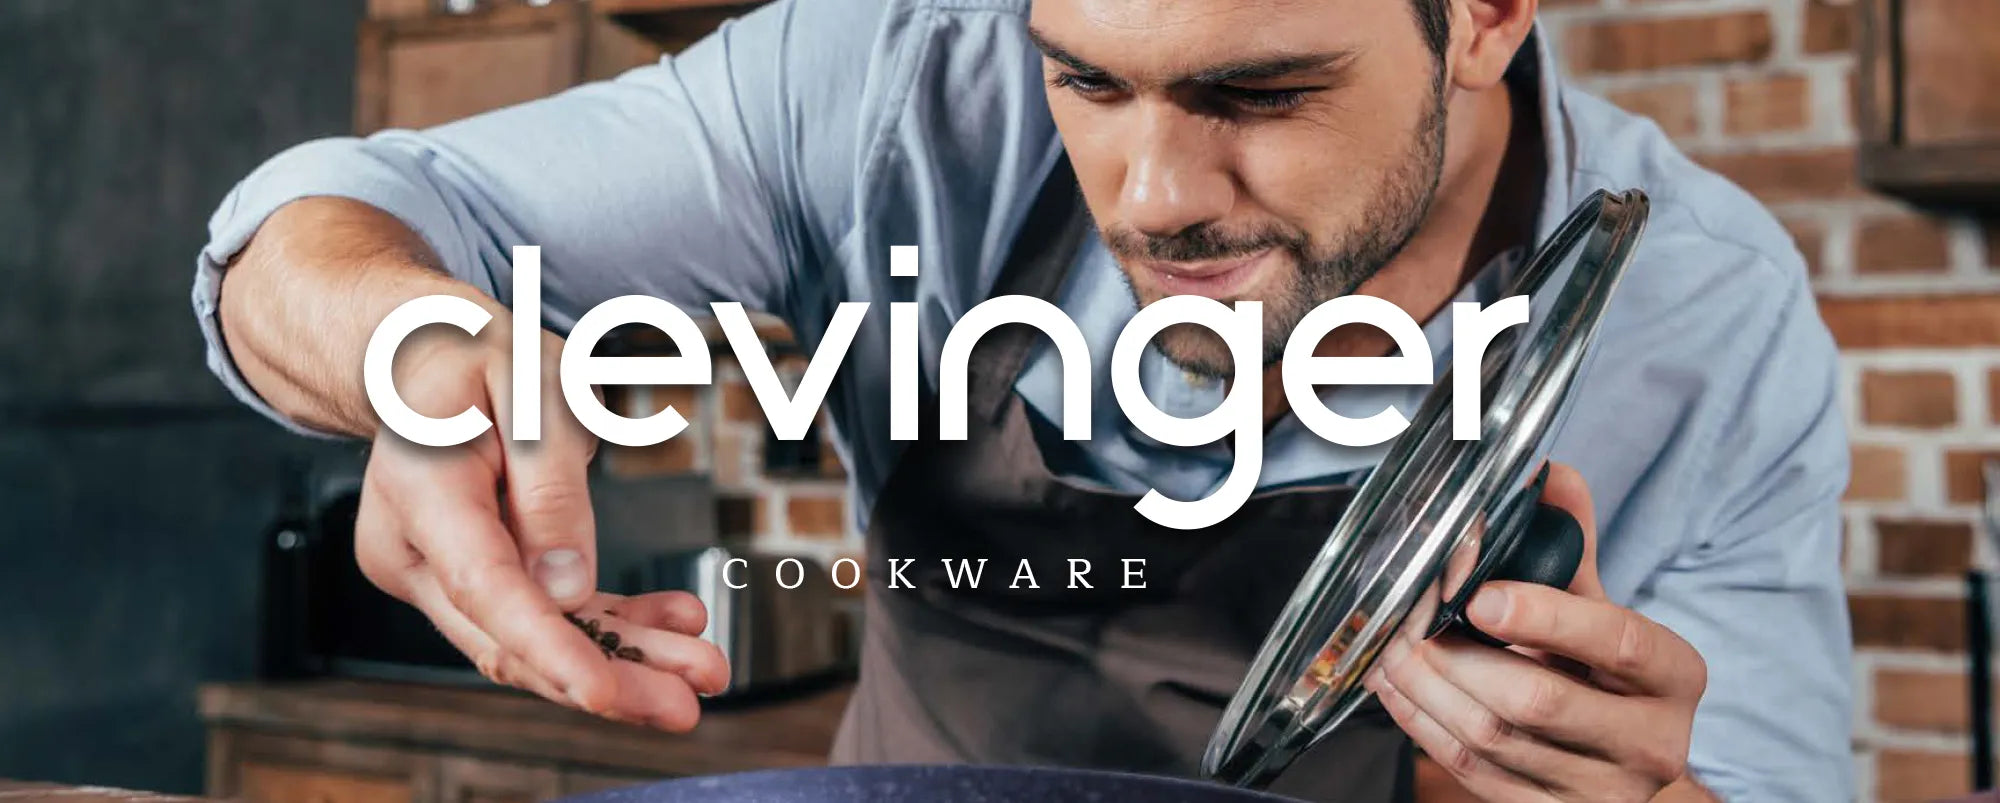 Clevinger cookware